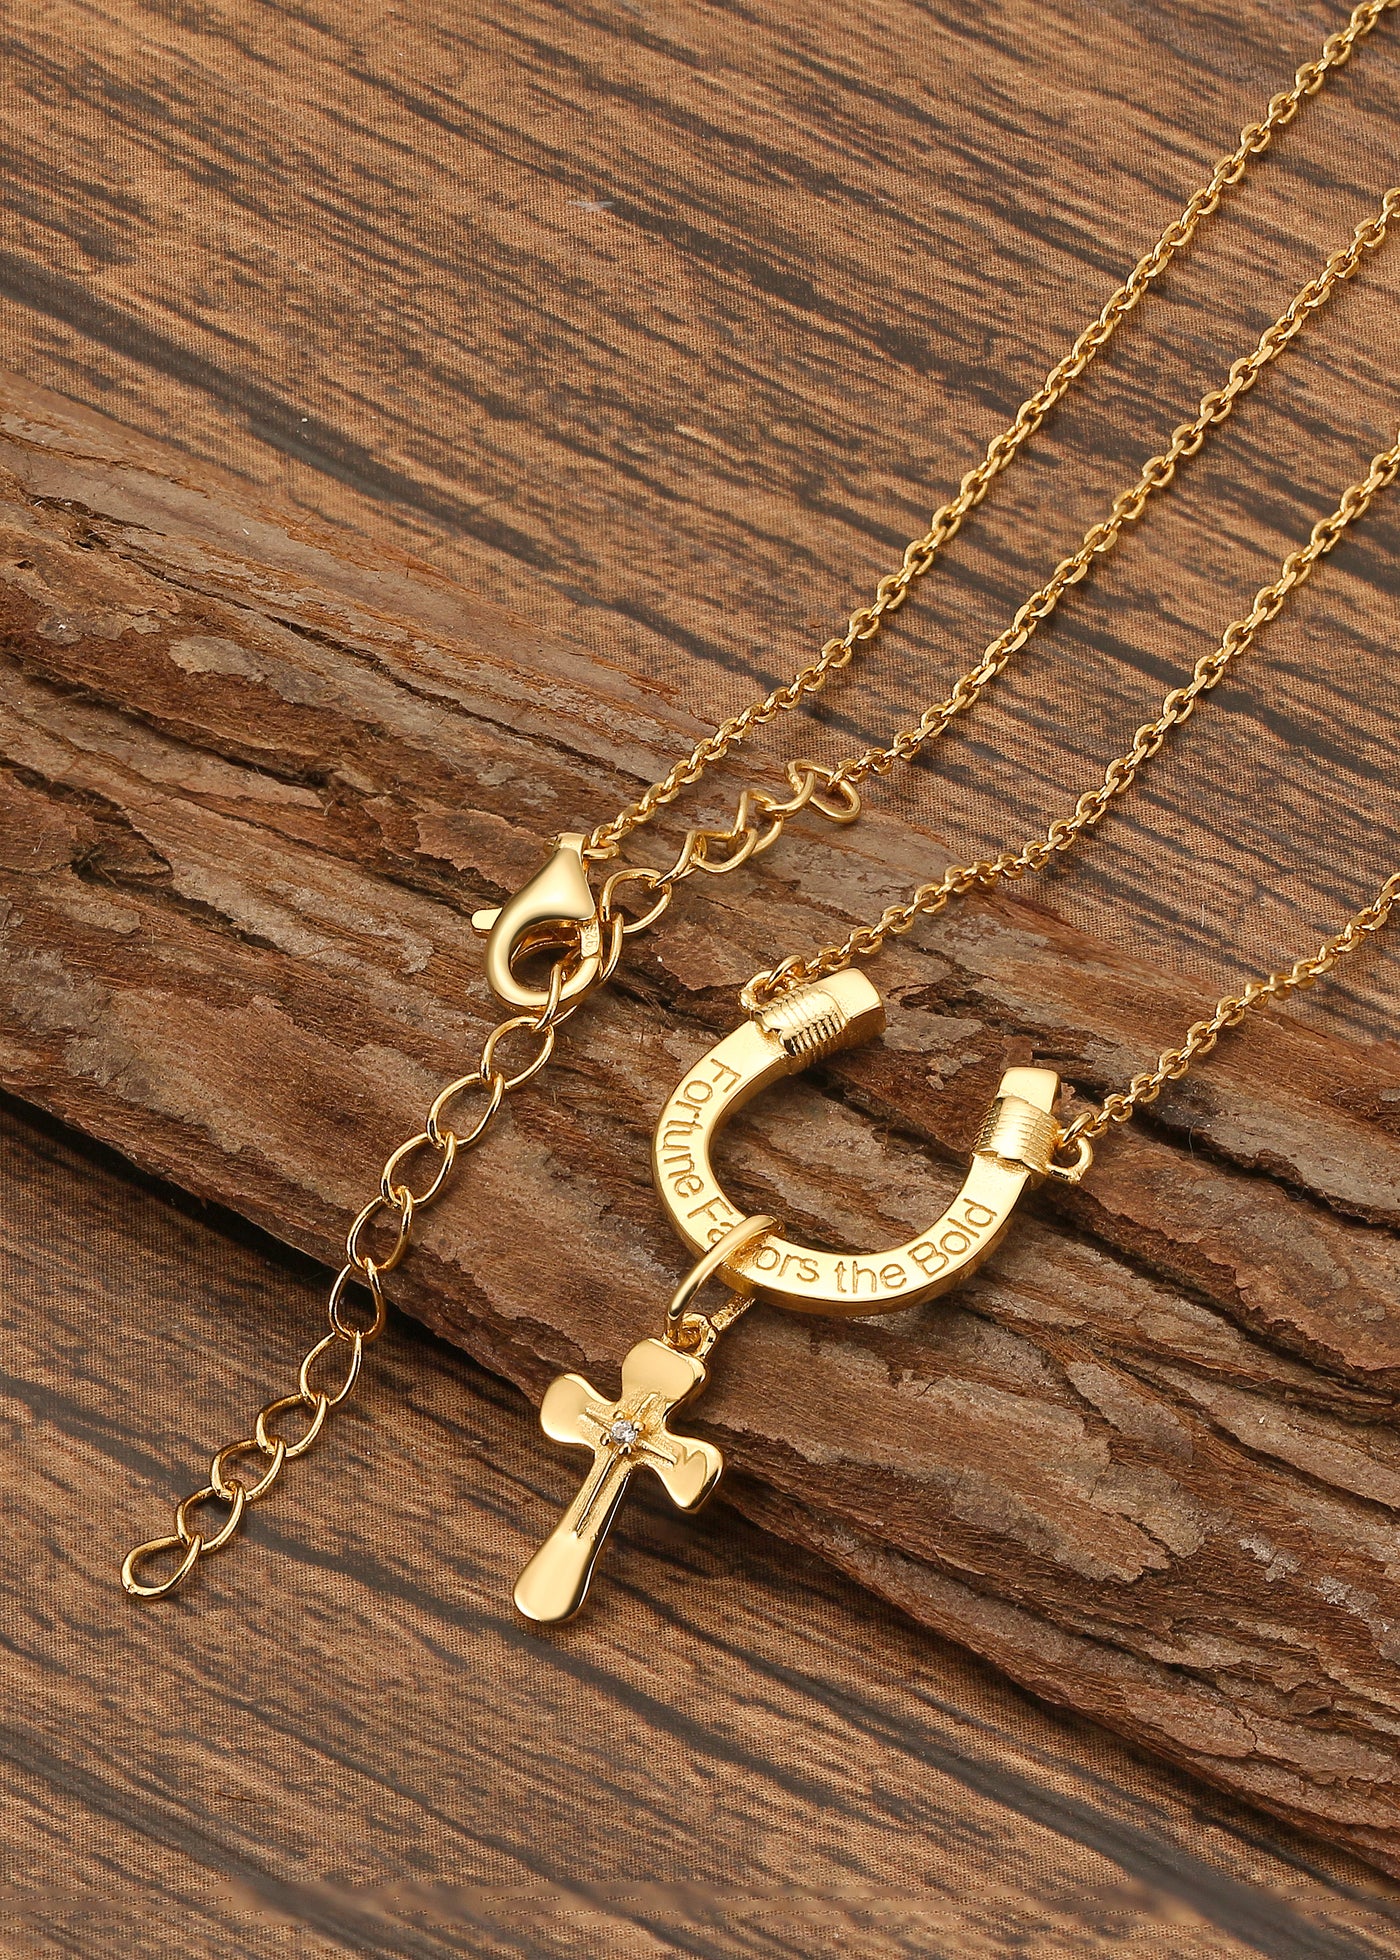 Dark Horse Fortune Favors The Bold faith Cross Gold Necklace